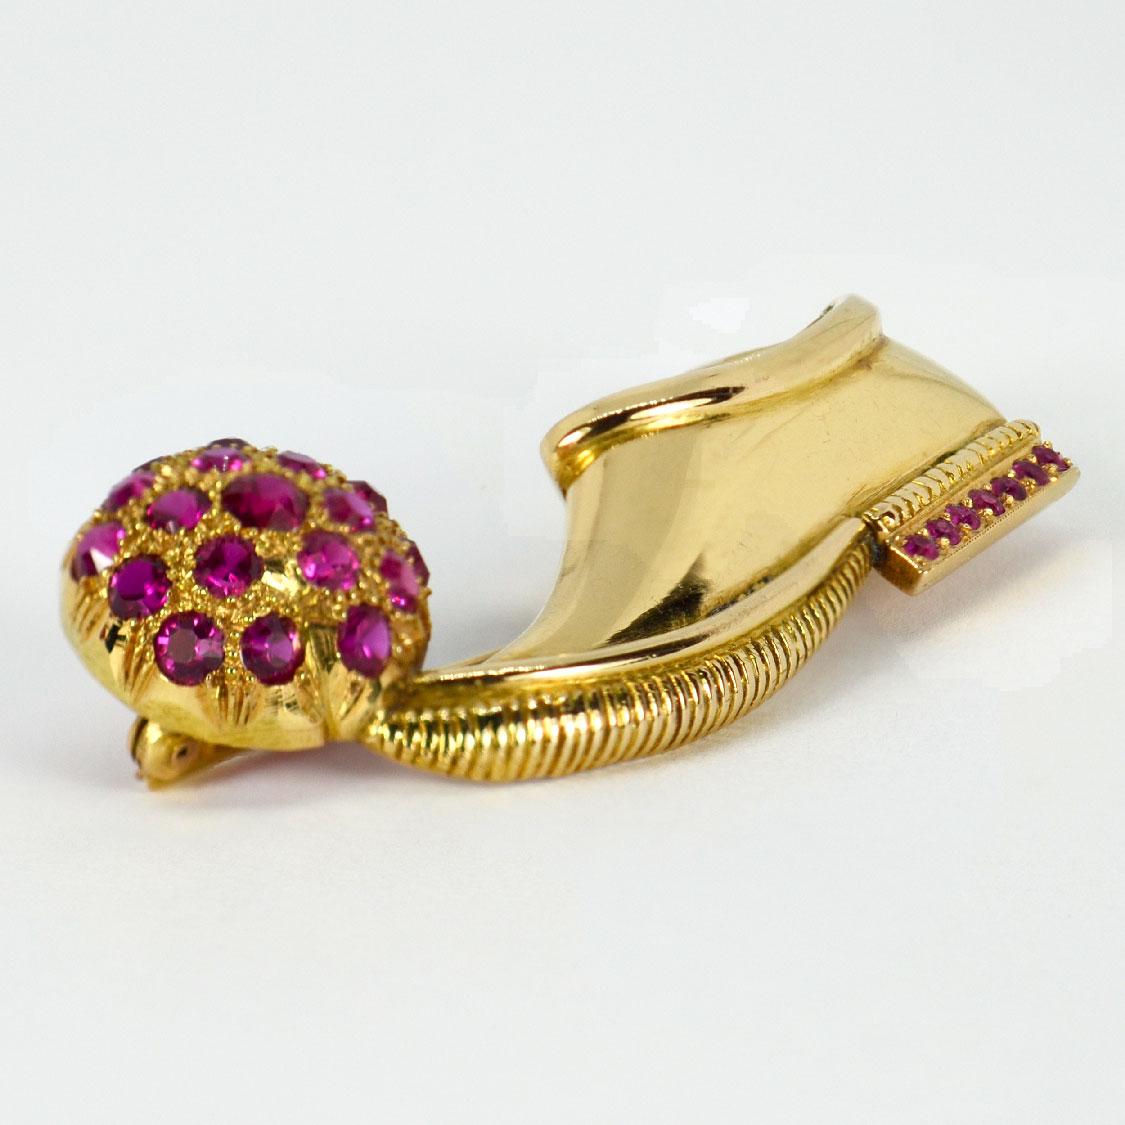 A 14 karat yellow gold brooch designed as a Greek tsarouchi shoe decorated with synthetic rubies to the heel with a ruby studded ball balanced on the toe. In the style of Vourakis and Paul Flato. Unmarked but tested as 14 karat gold.

Dimensions: 5